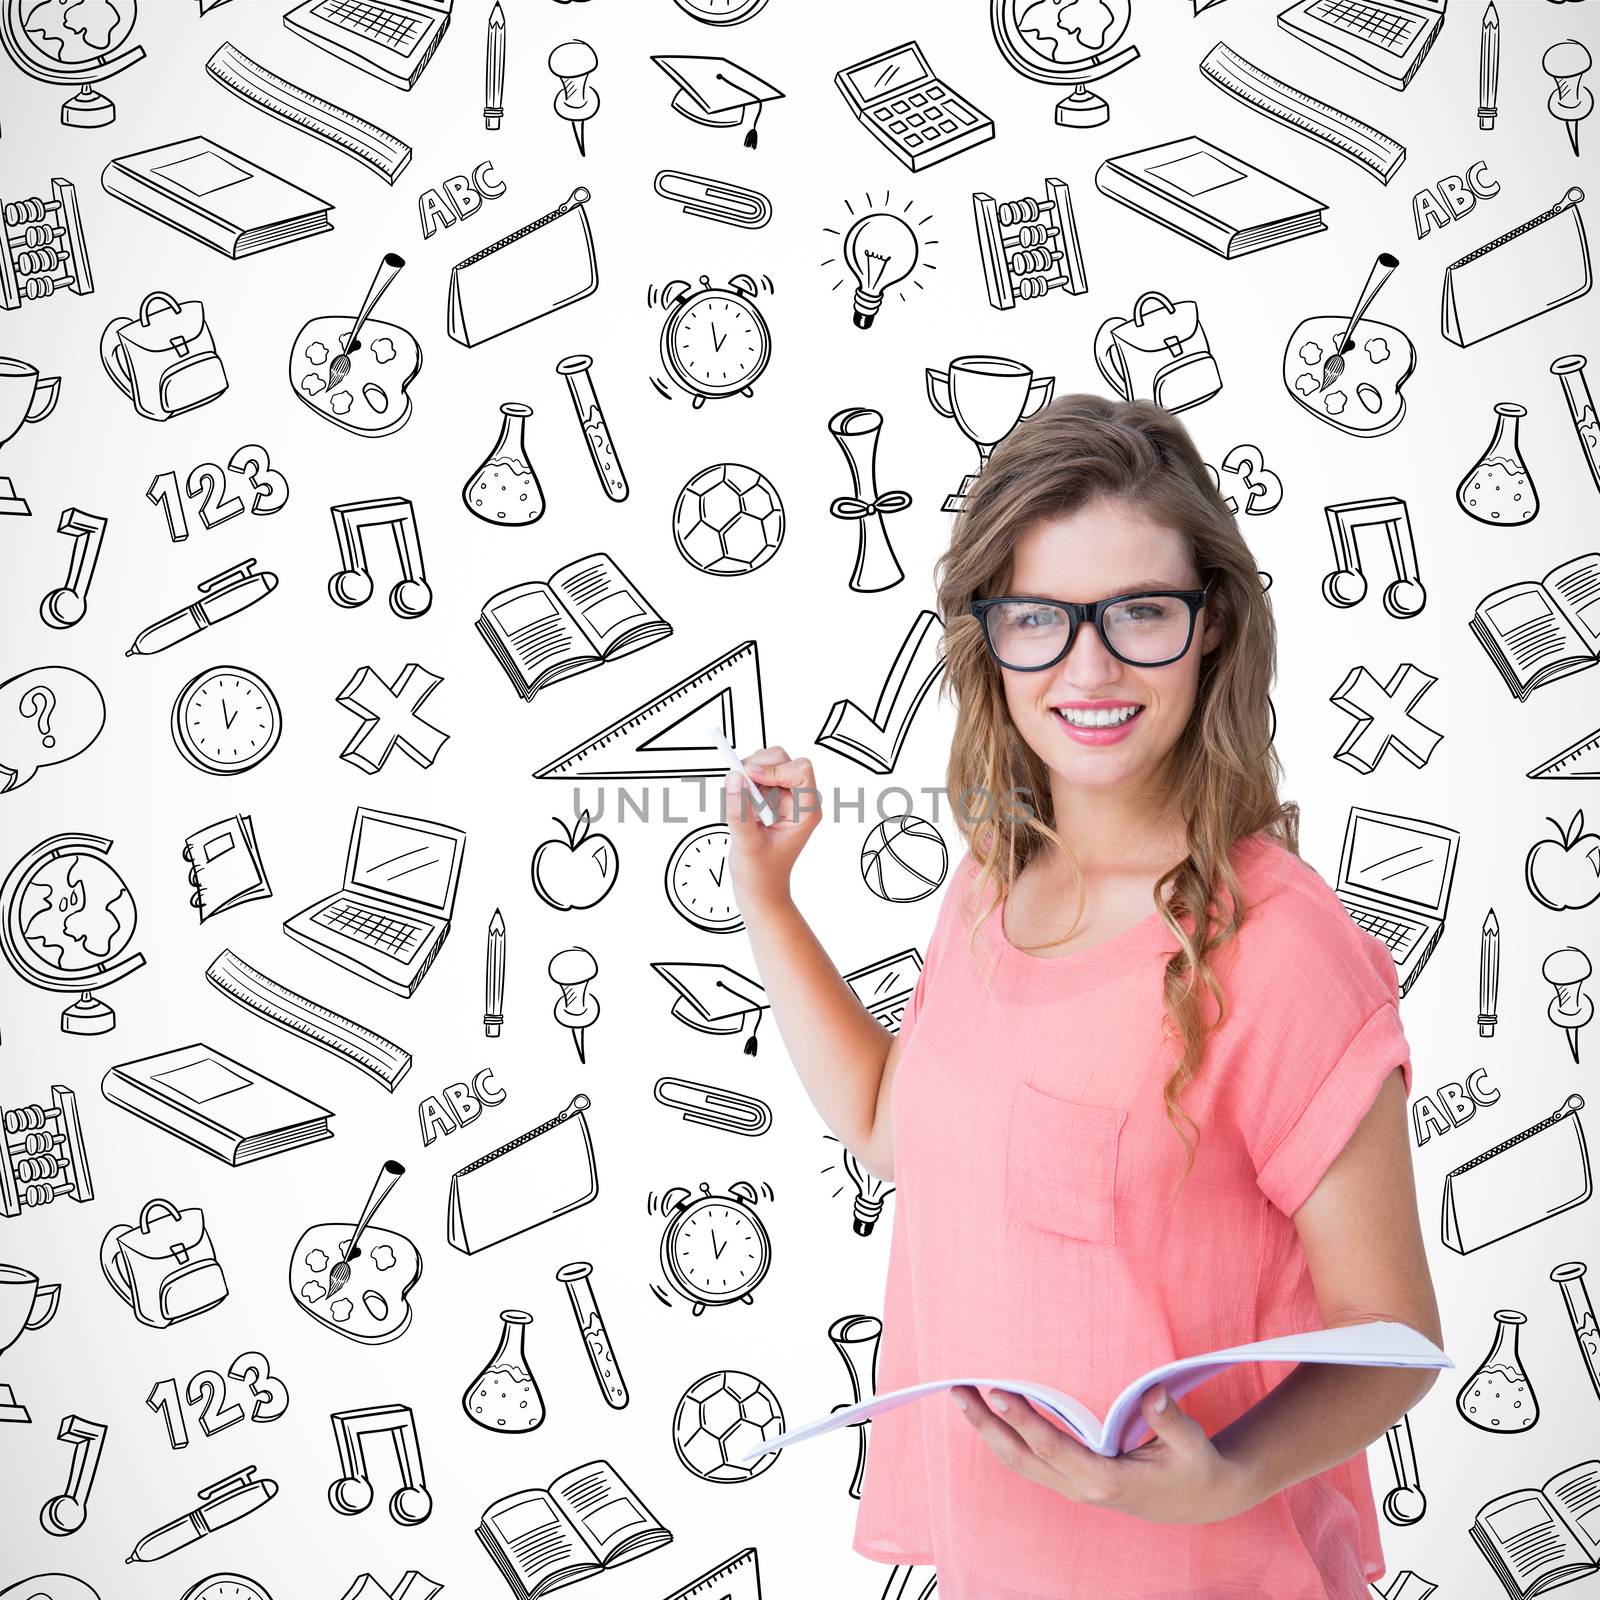 Hipster woman holding notebook  against school wallpaper